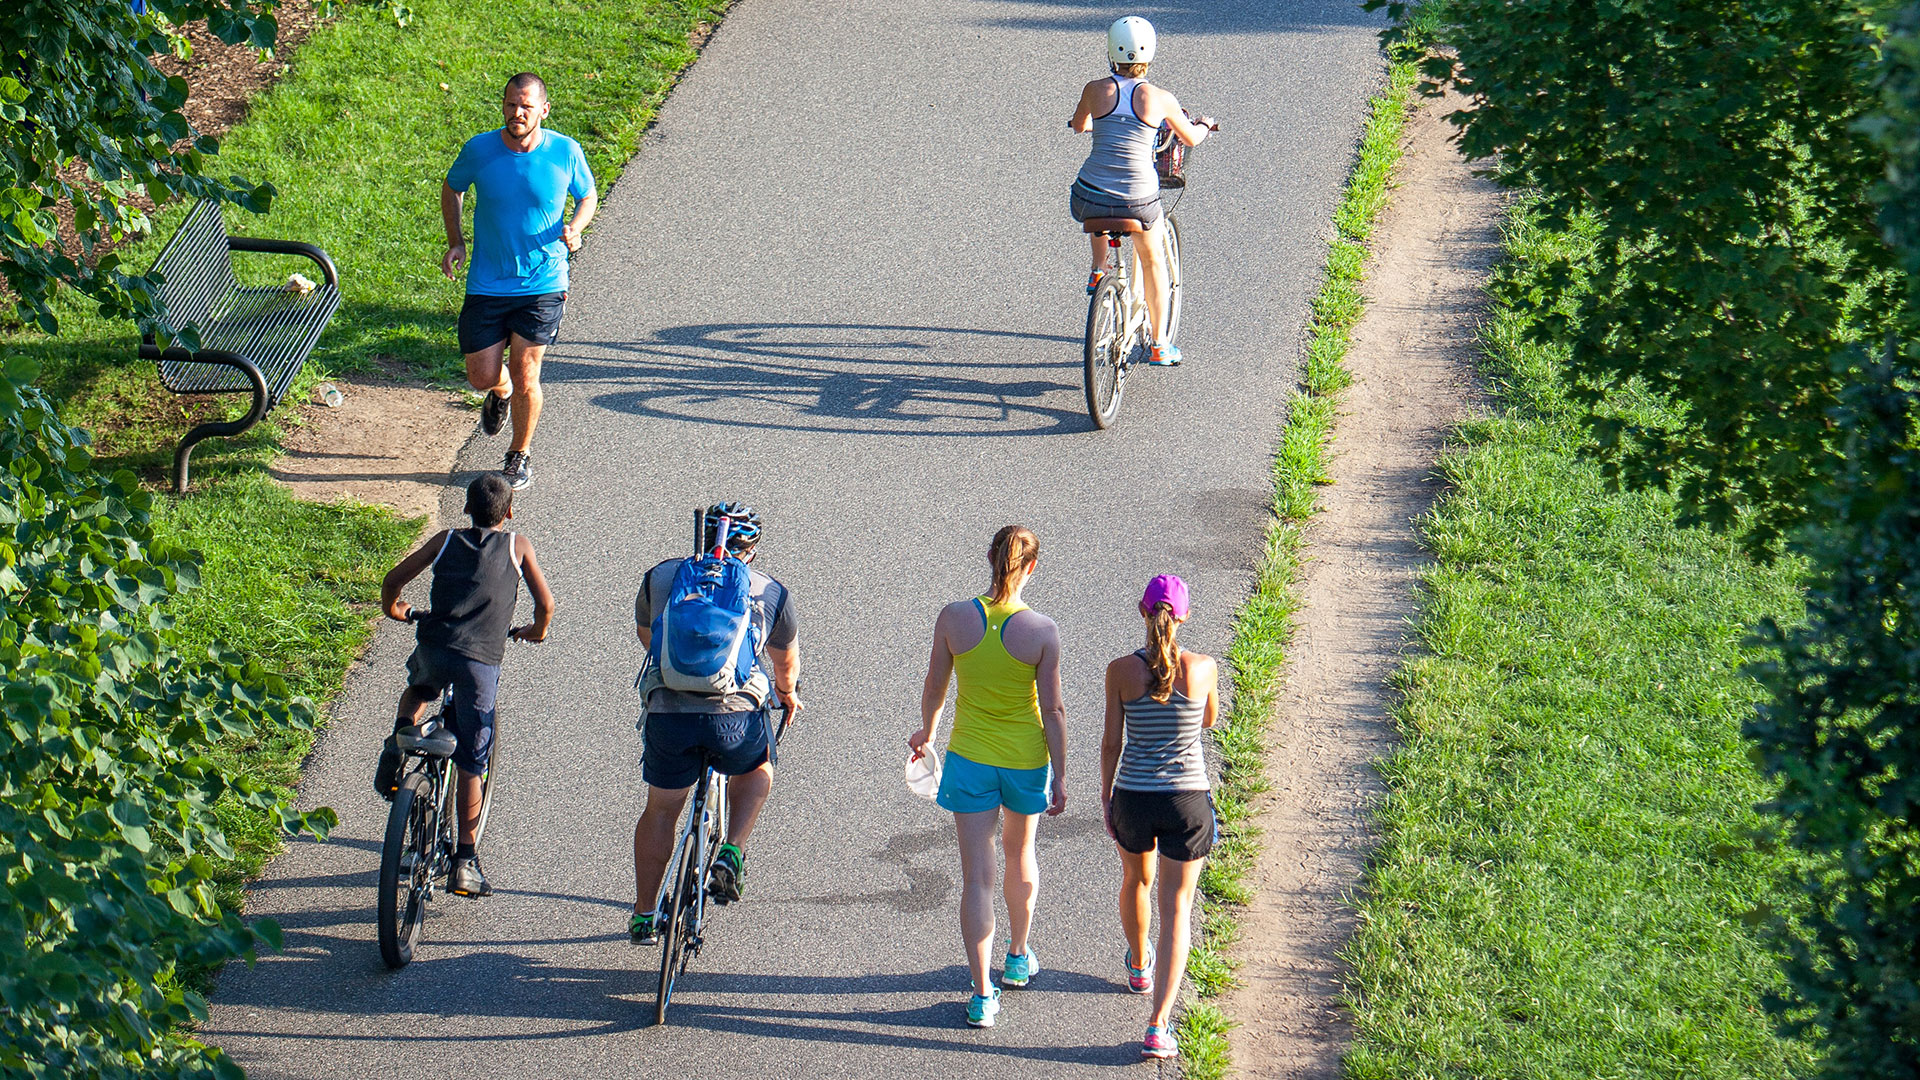 People jogging and biking on a crowded trail